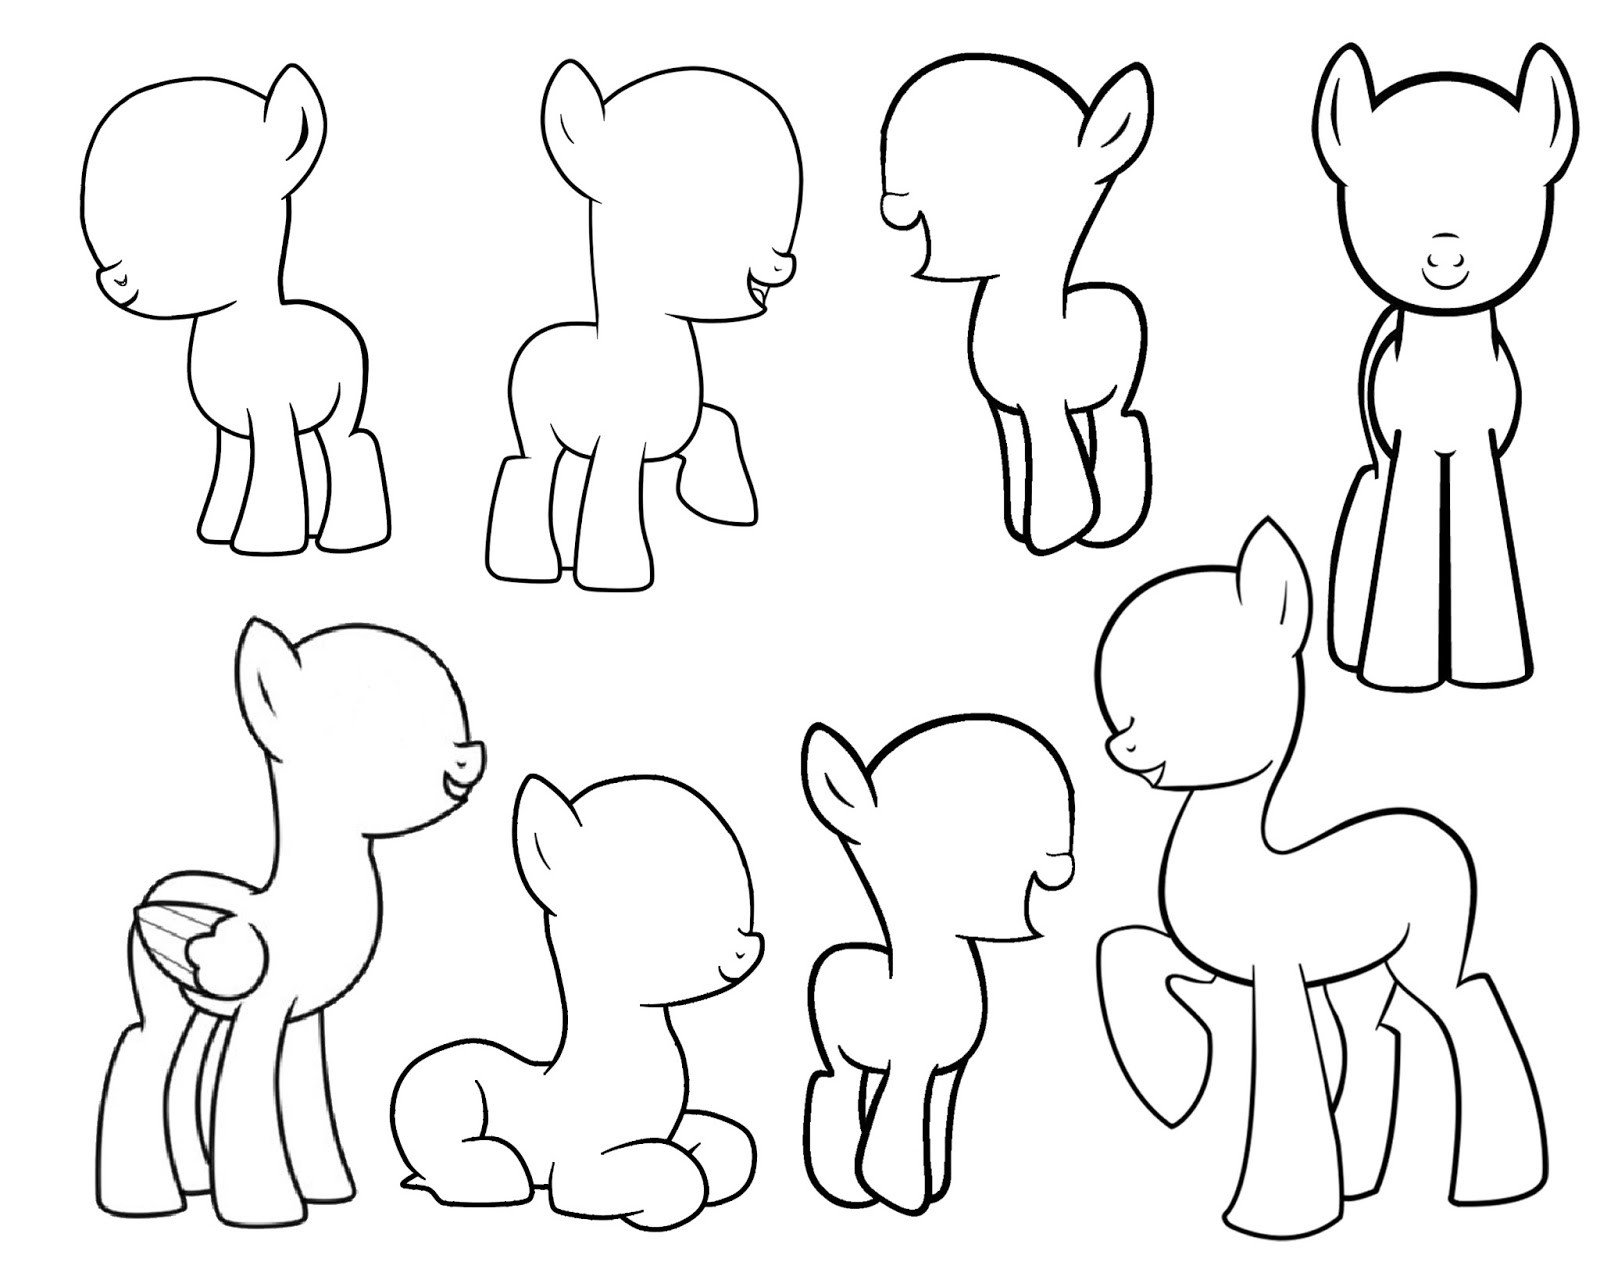 Doodlecraft Design and DRAW your own My Little Pony